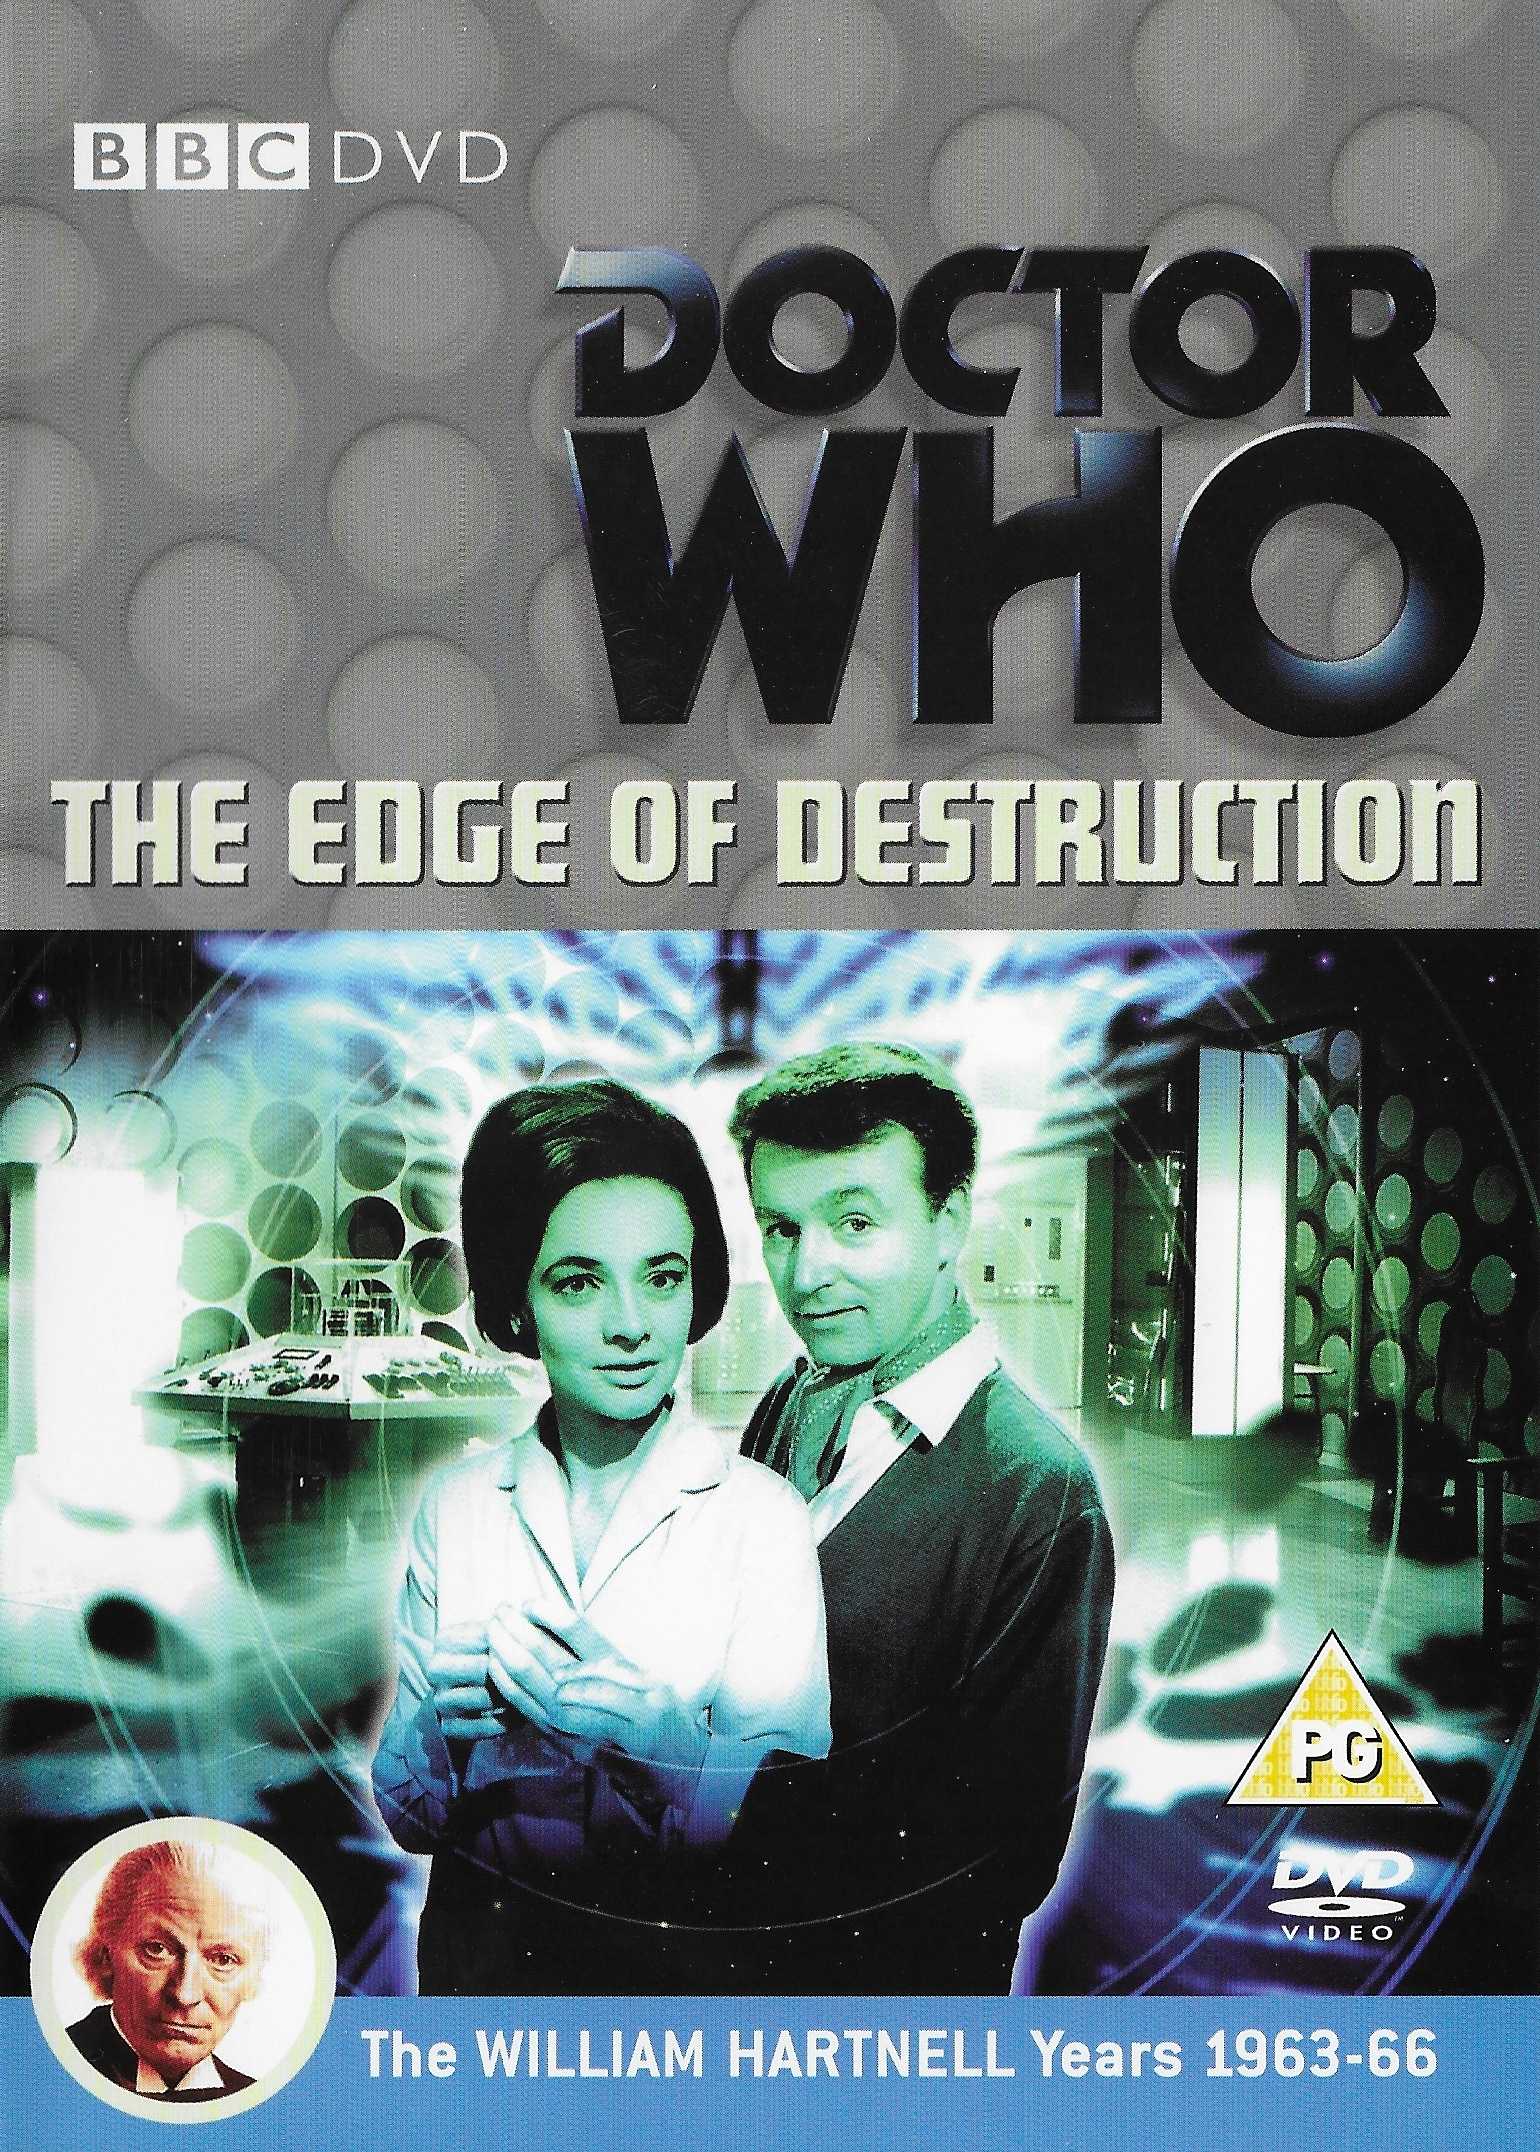 Picture of BBCDVD 1882C Doctor Who - The edge of destruction by artist David Whitaker from the BBC records and Tapes library